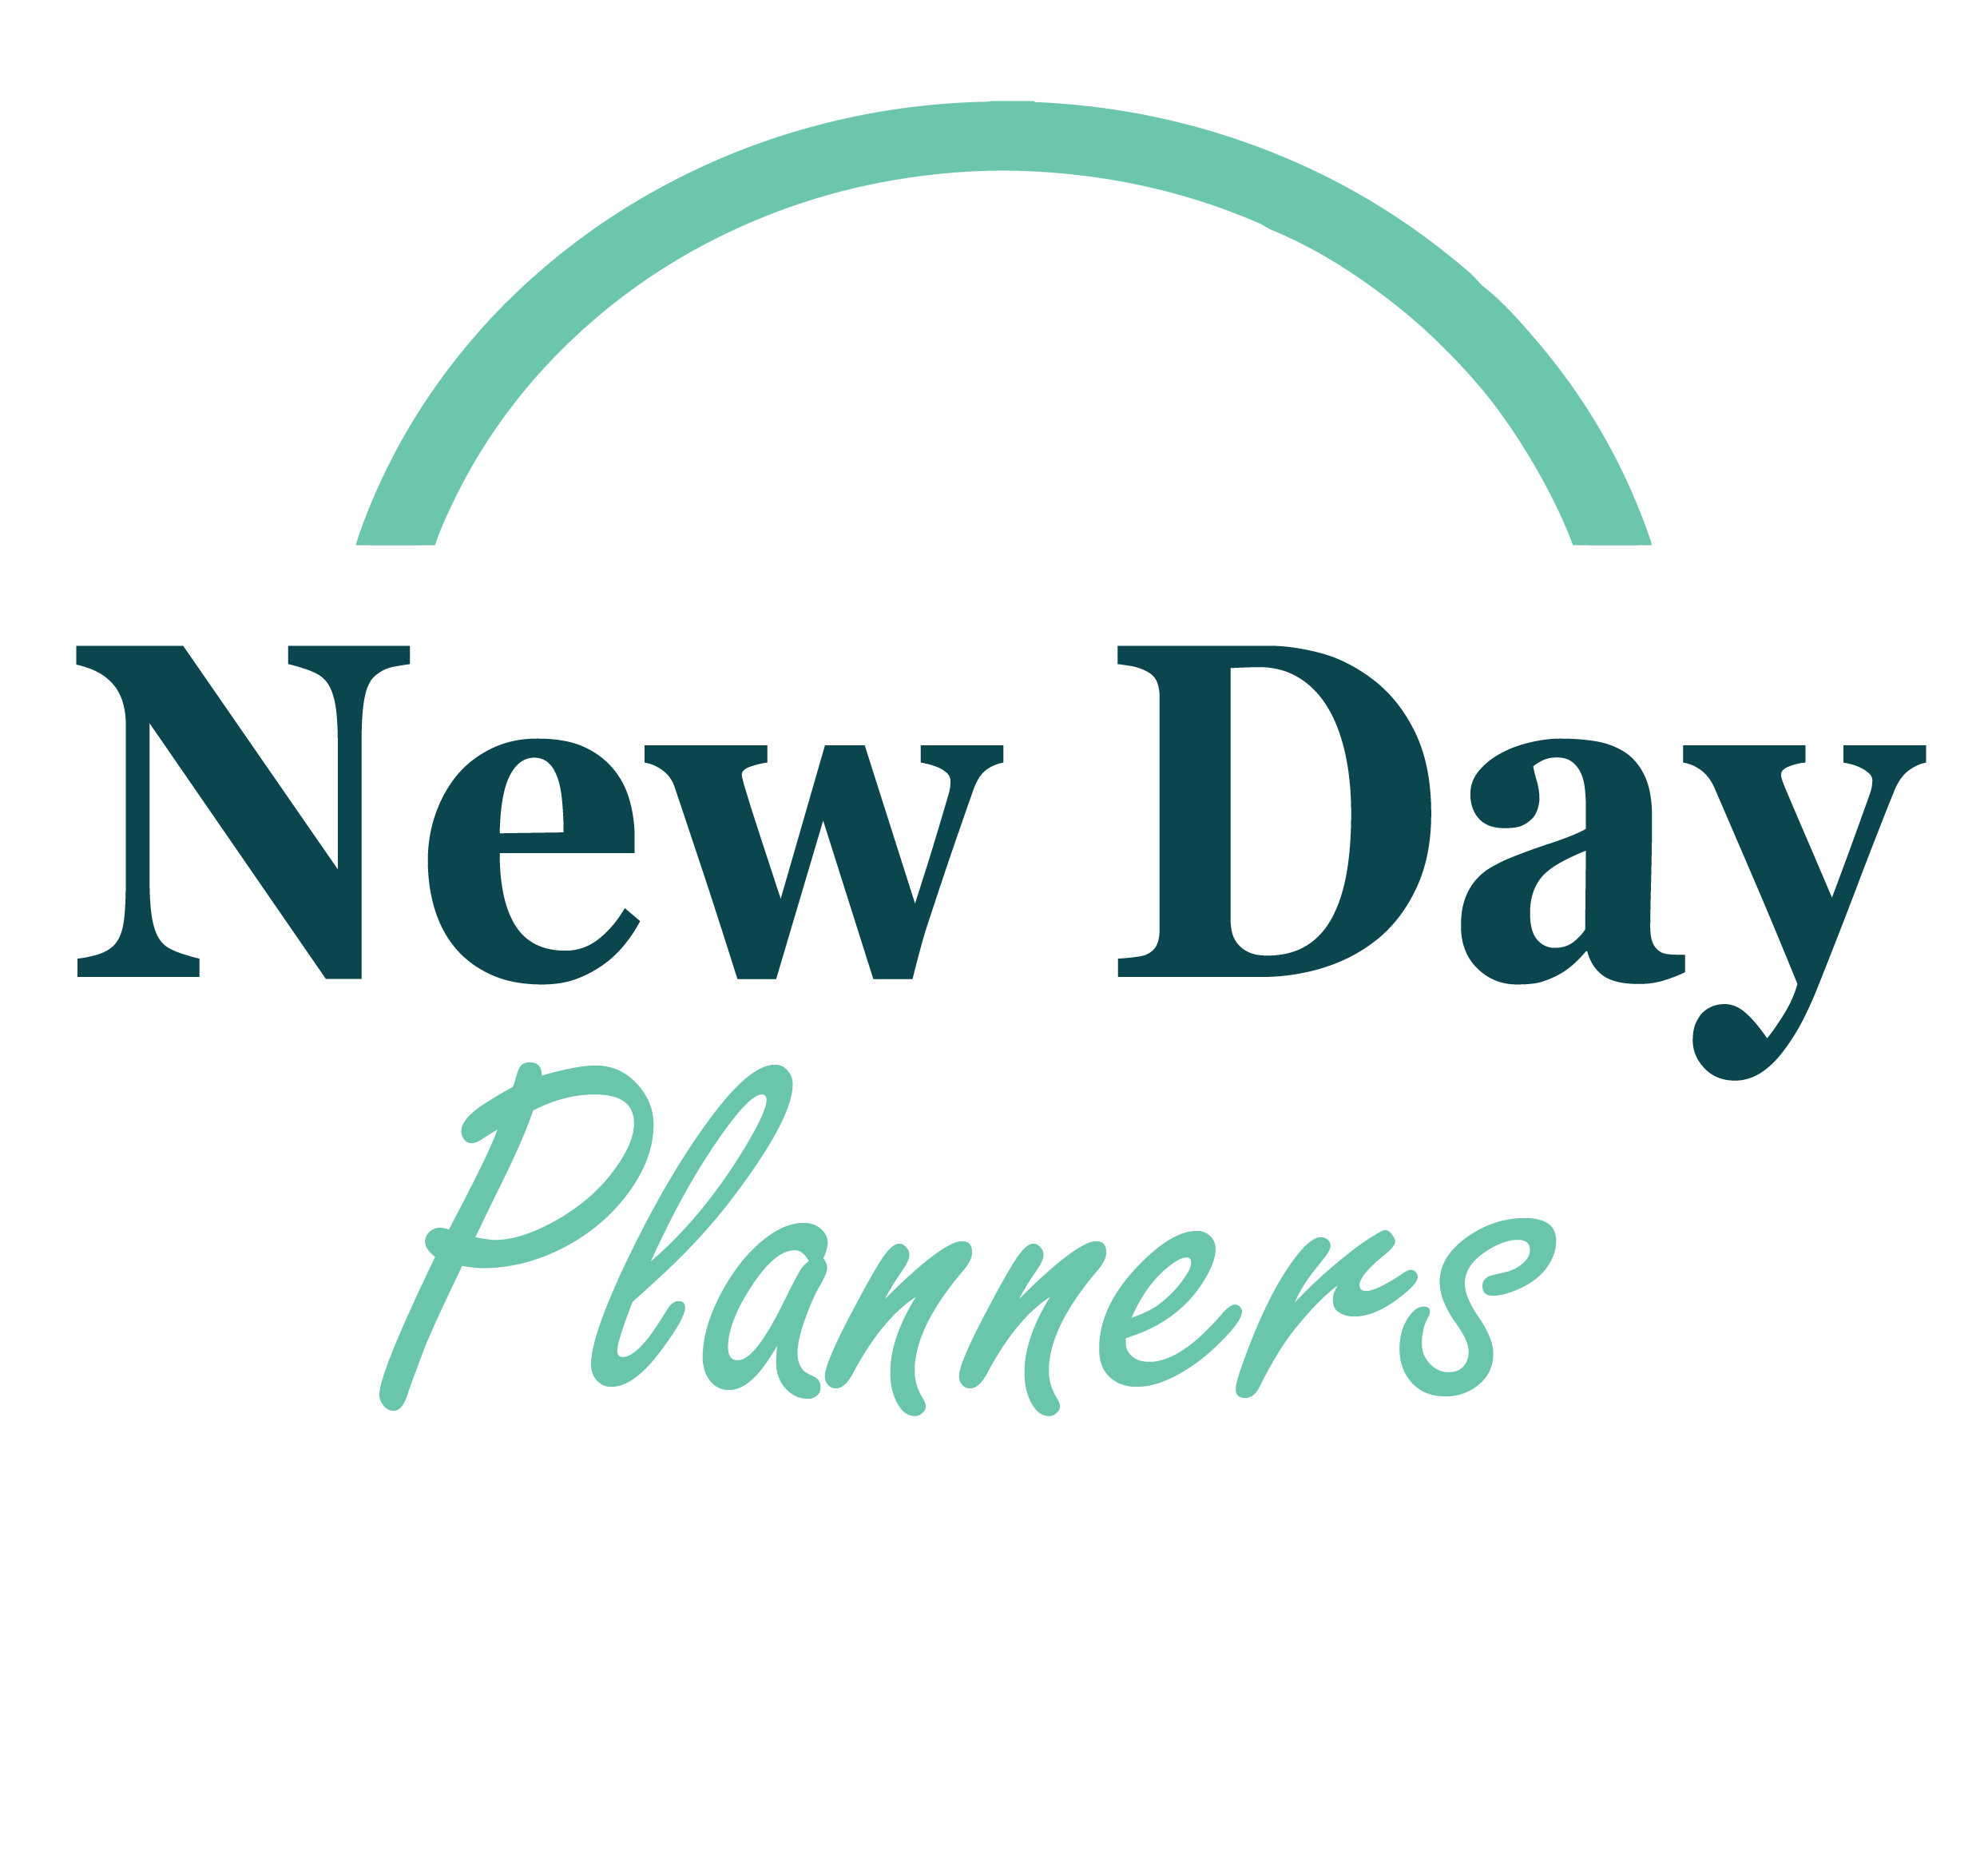 New Day Planners